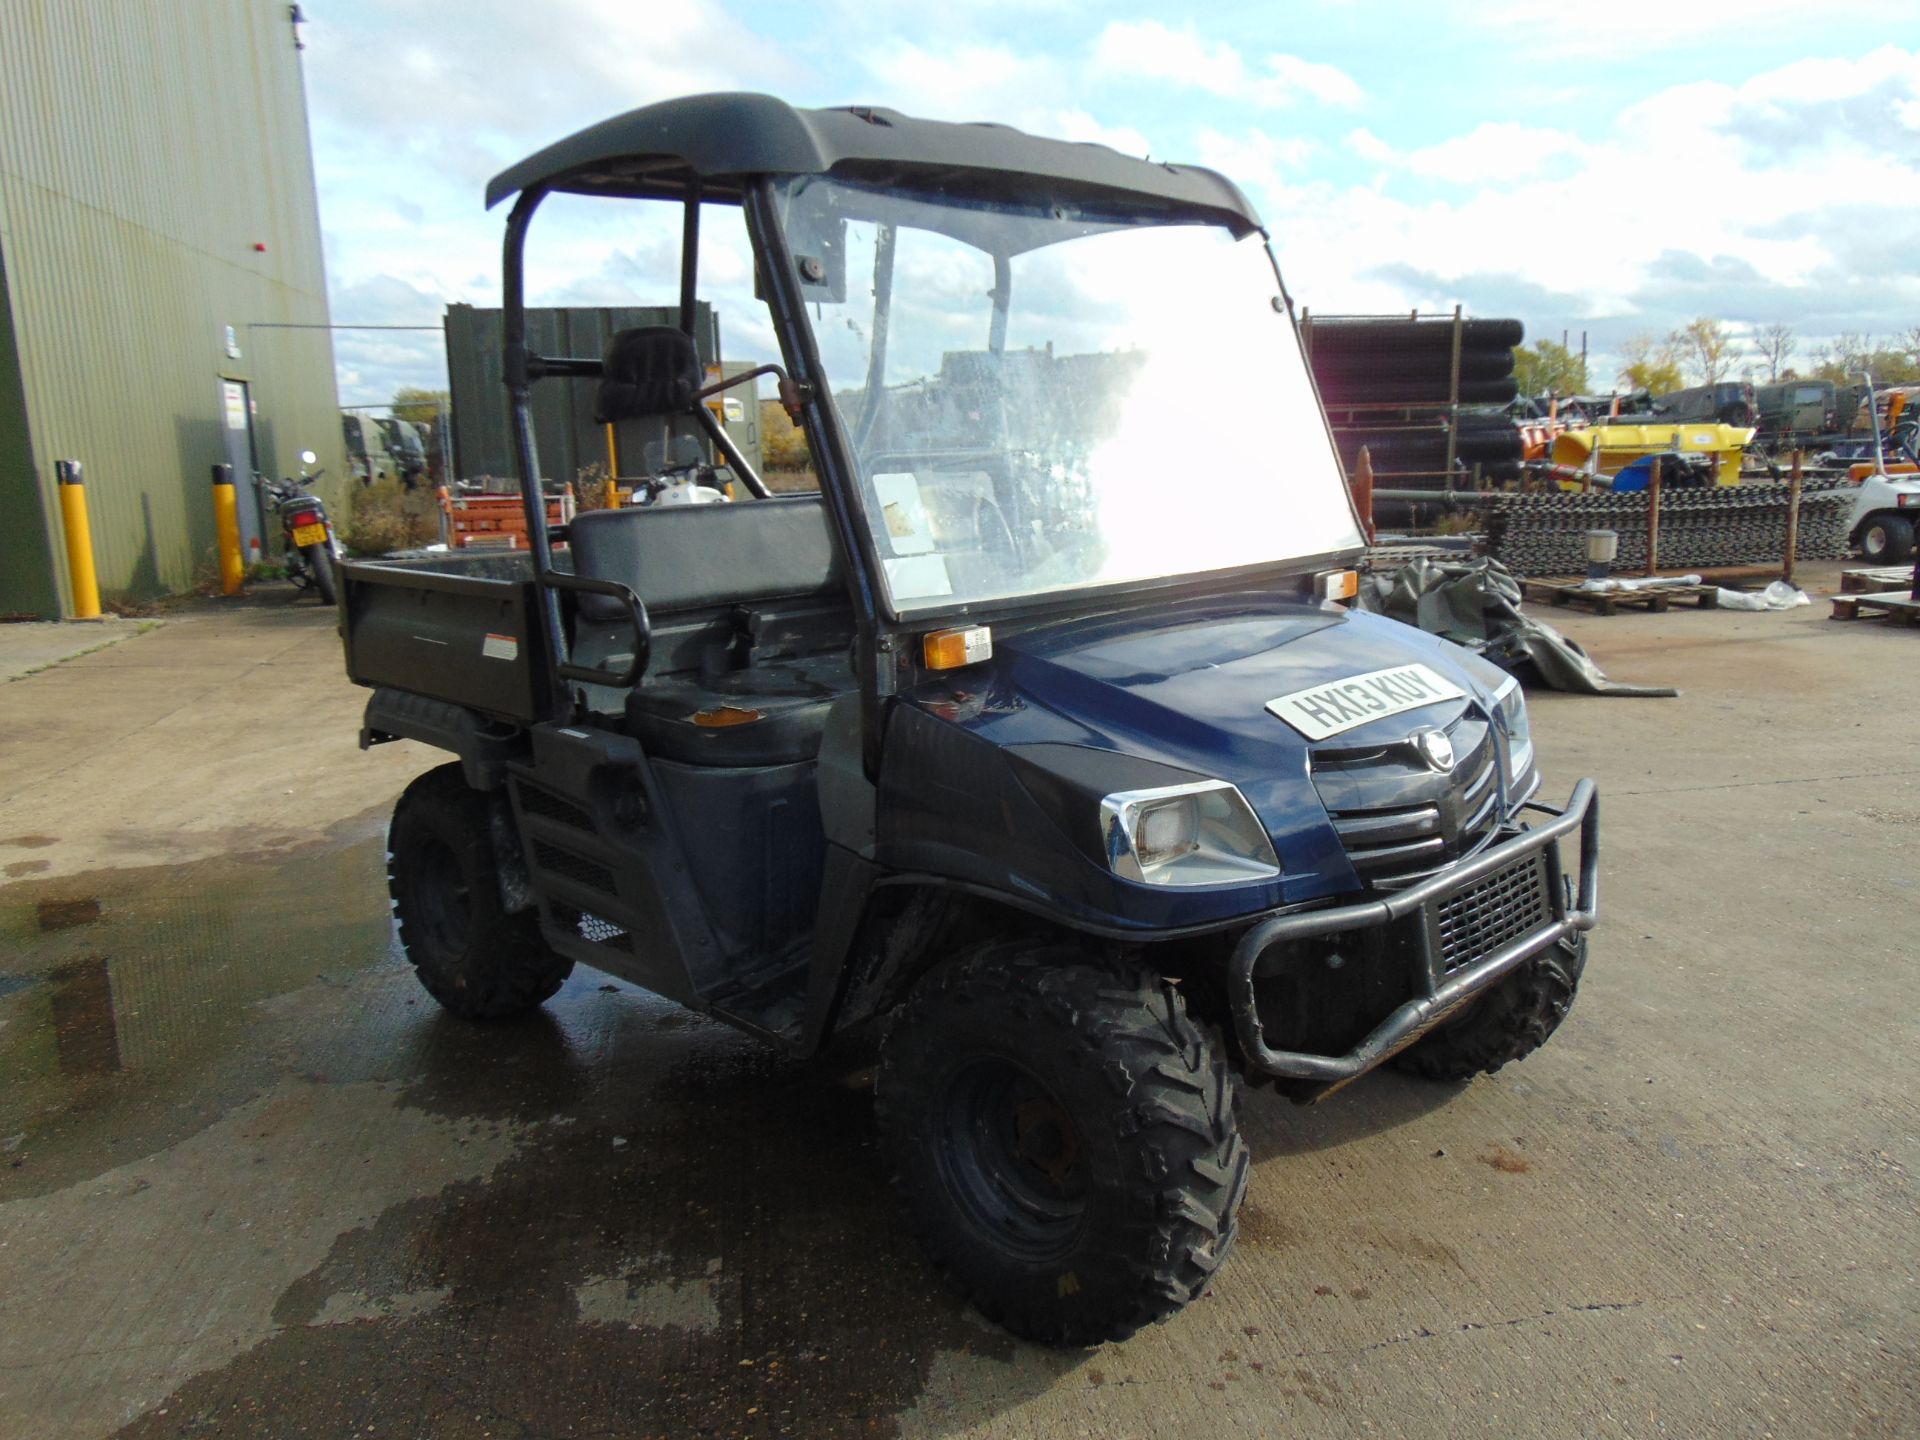 2013 Cushman XD1600 4x4 Diesel Utility Vehicle Showing 217 hrs - Image 6 of 17